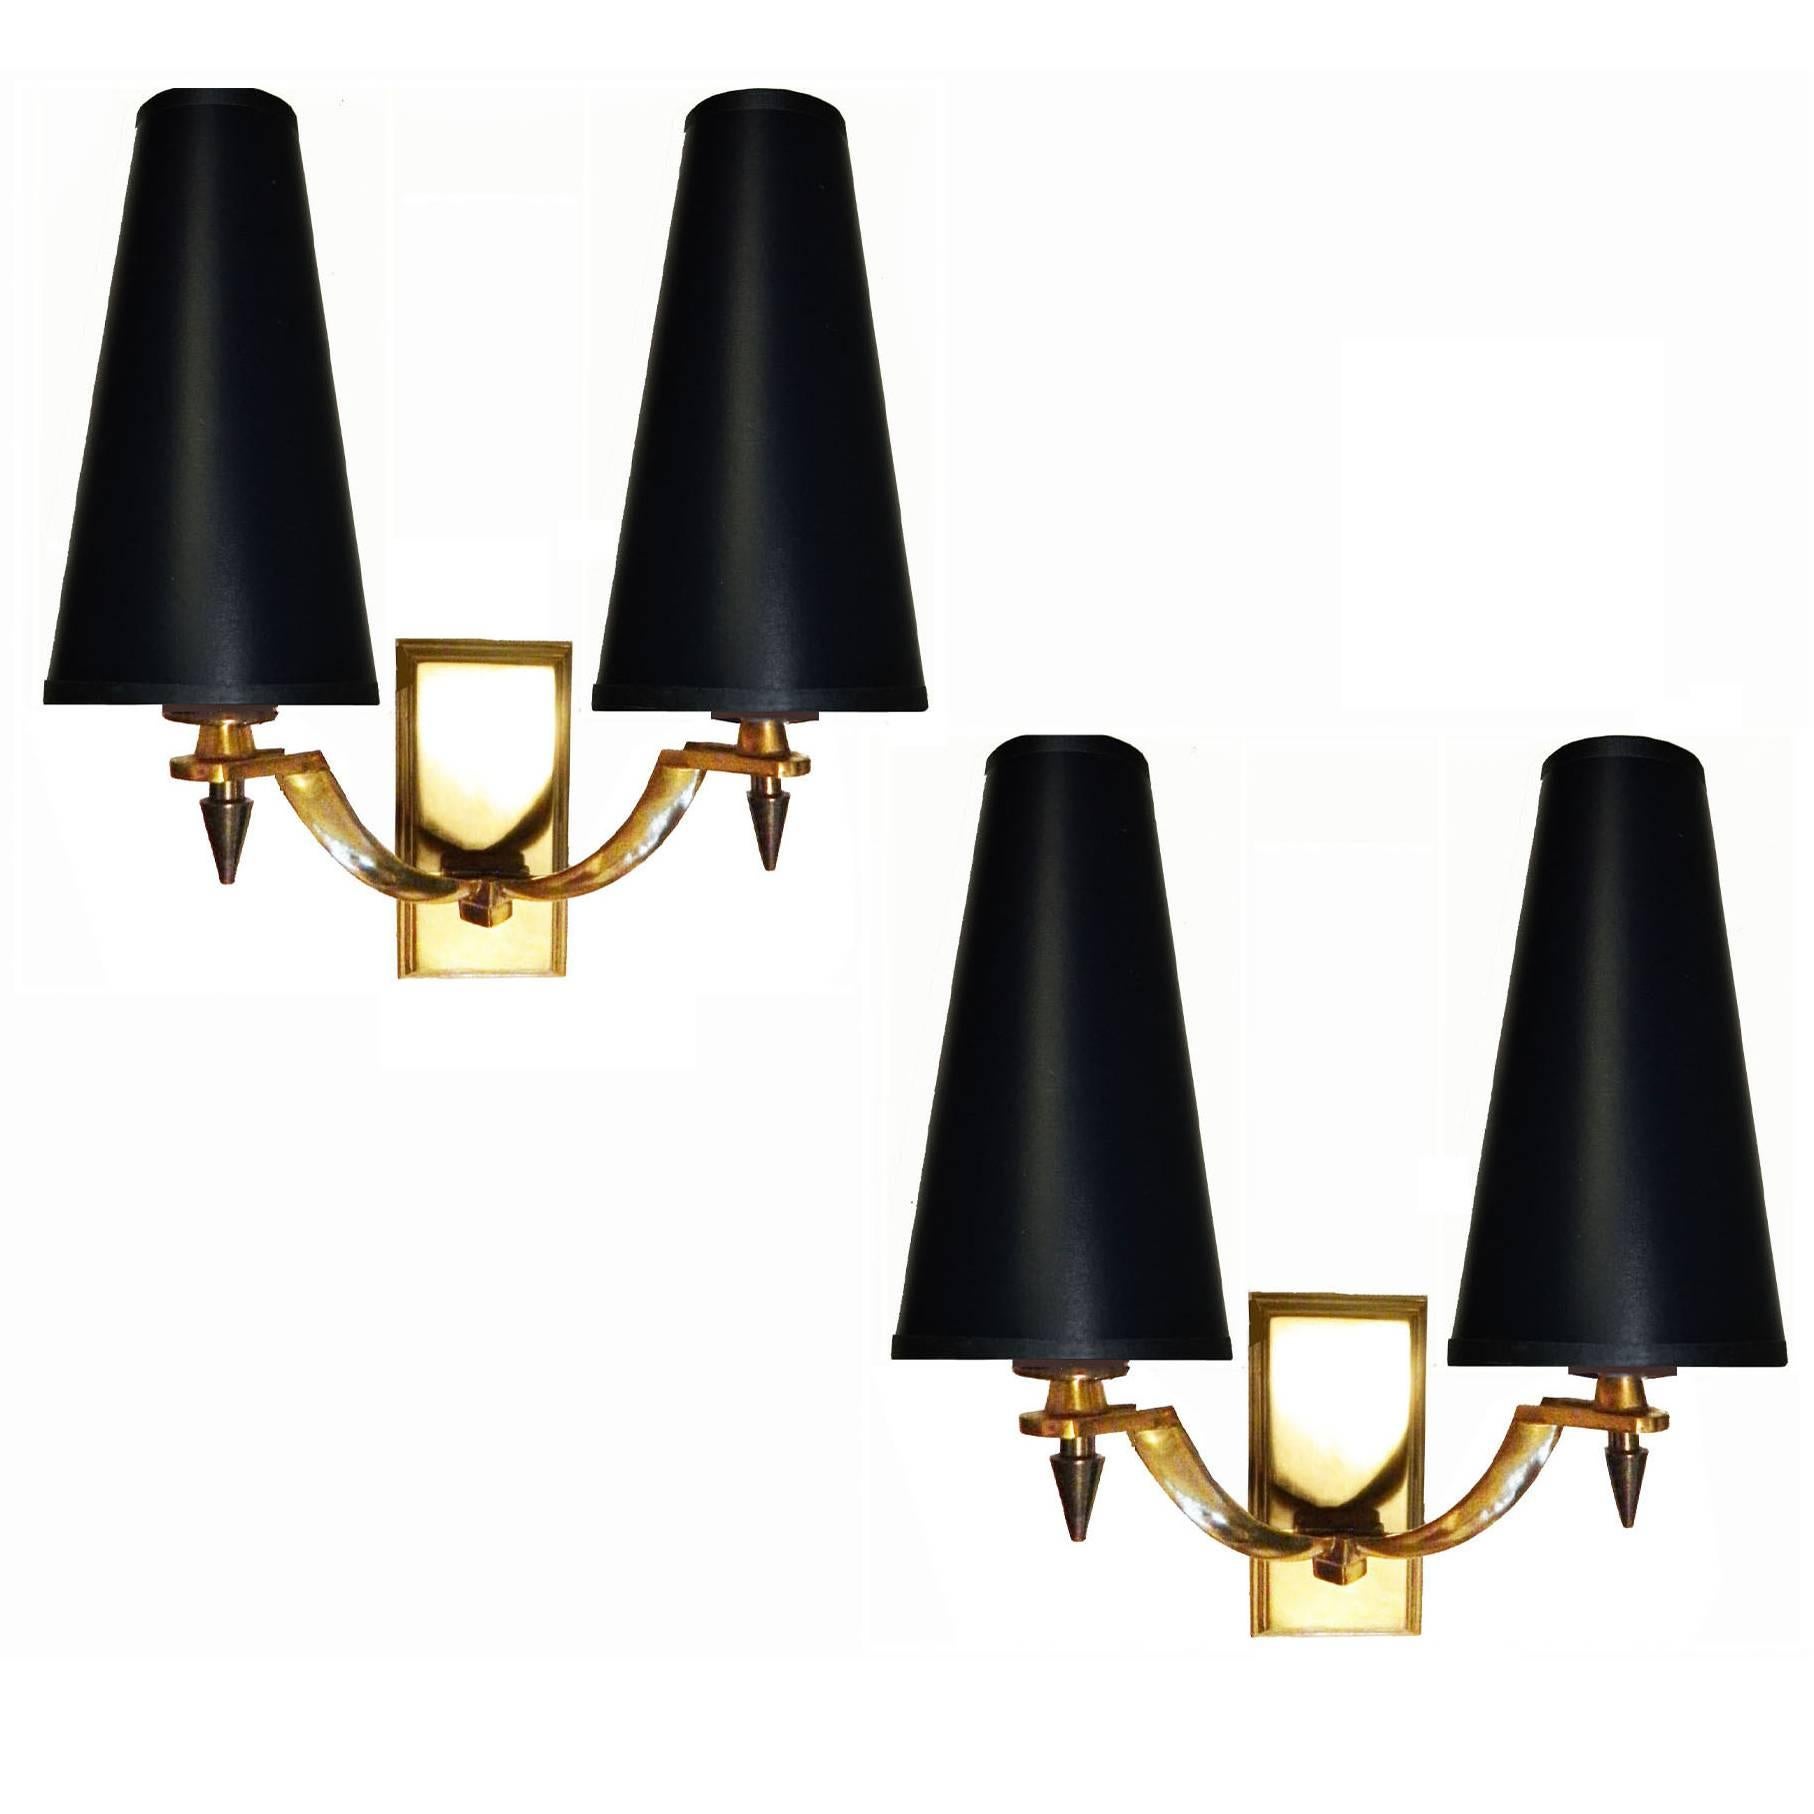 Pair of Very Elegant Two Patinas Sconces by Ateliers Petitot. 3 pairs available.